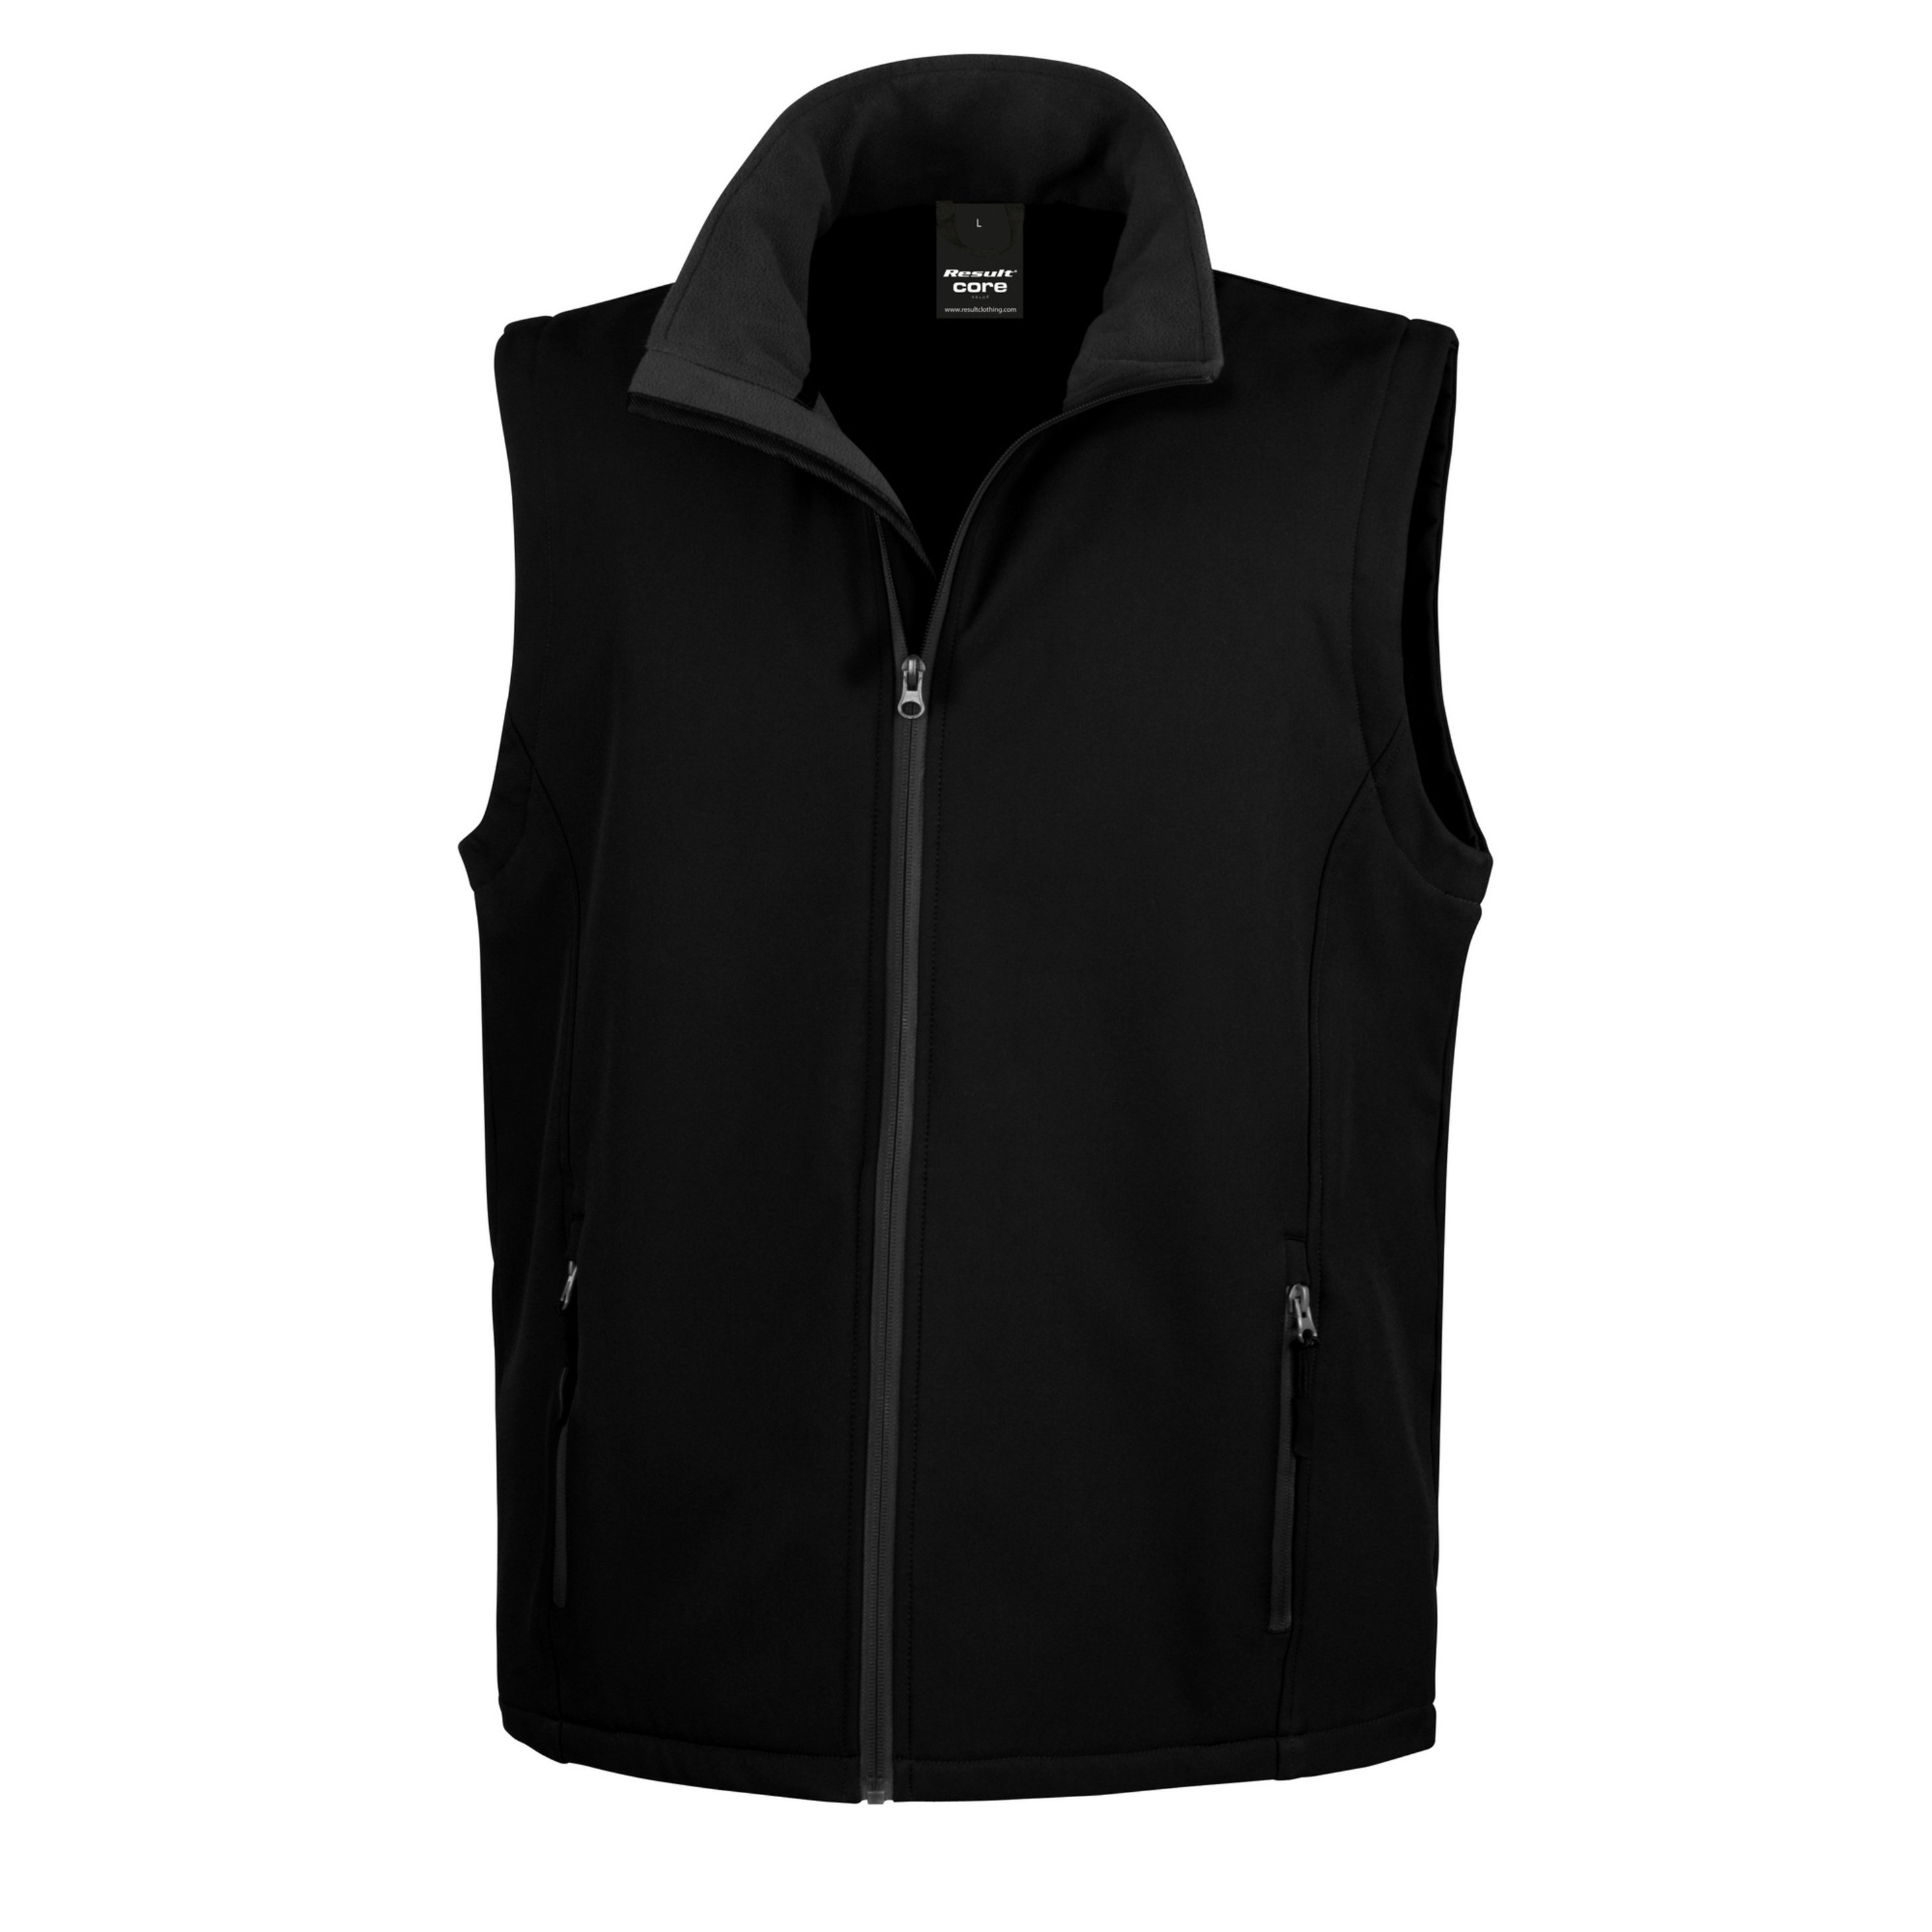 Chaleco Softshell Result Ideal - negro - 